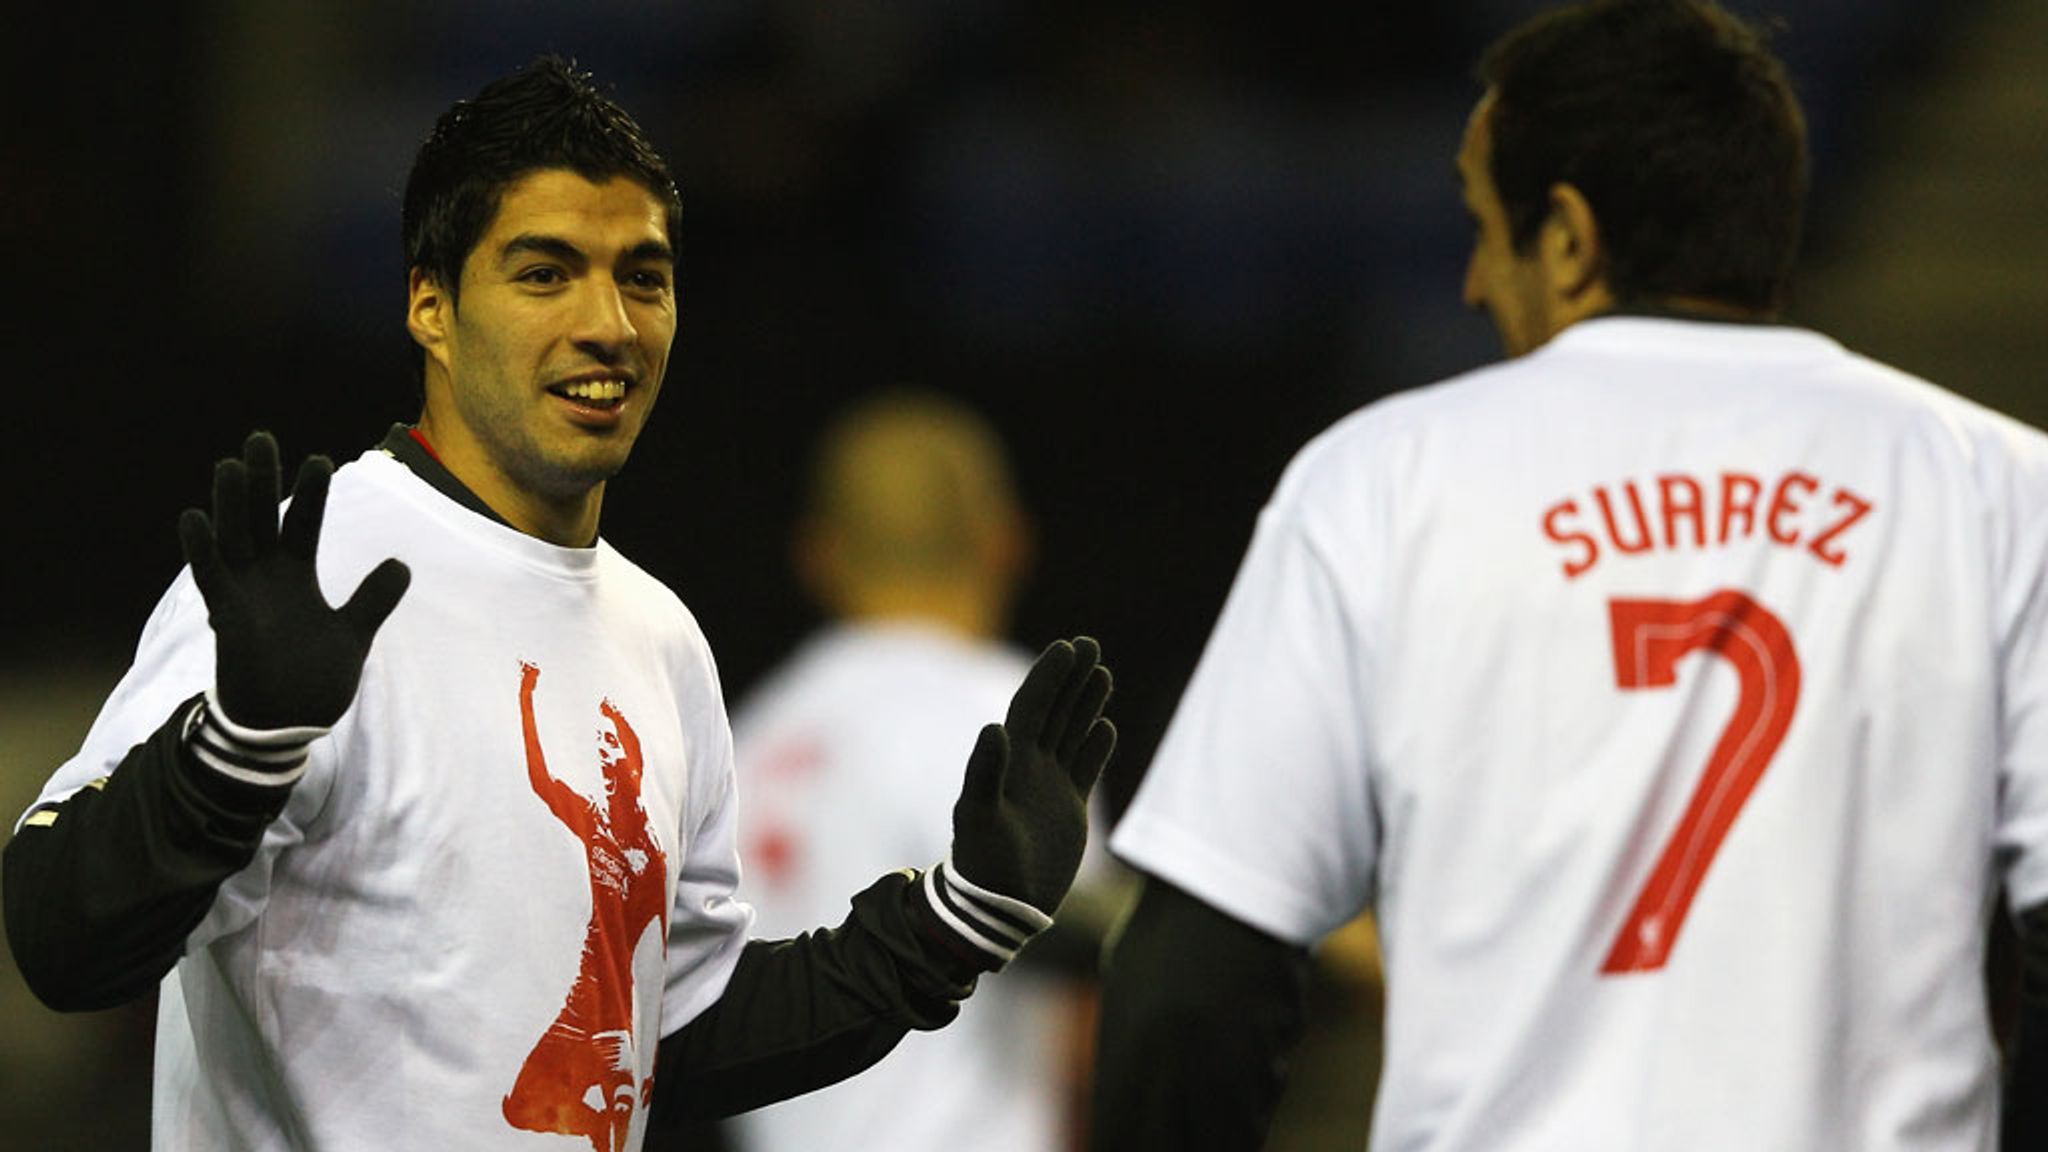 Kenny Dalglish says Liverpool were instructed to wear Luis T- shirts | Football News | Sports